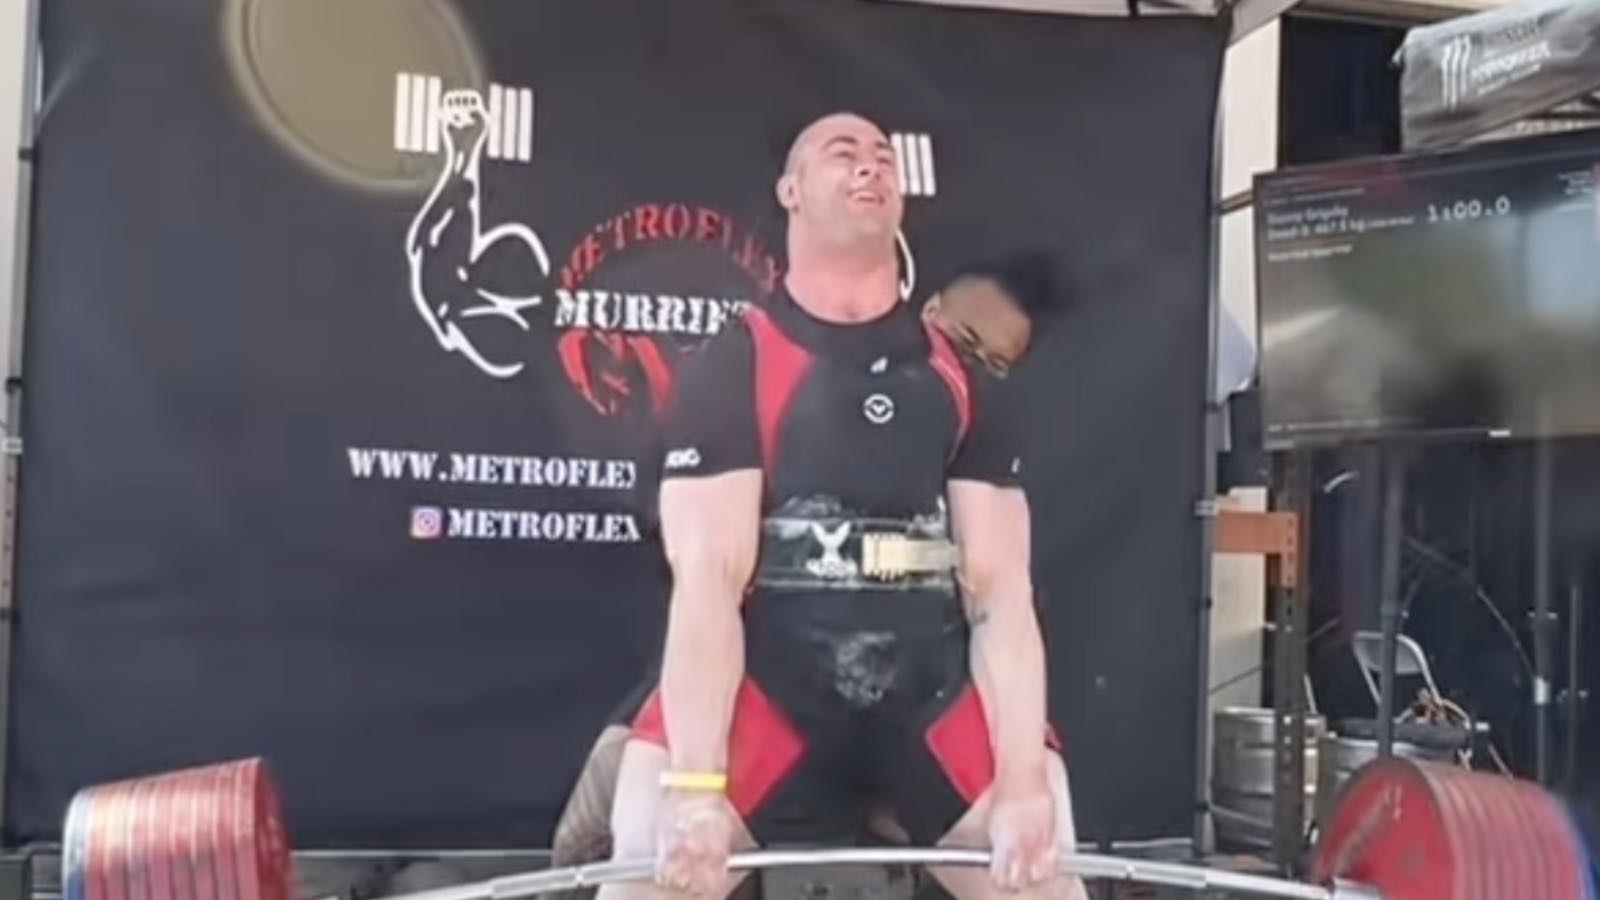 danny-grigsby-(110kg)-deadlifts-all-time-world-record-of-4675-kilograms-(1,030.6-pounds)-–-breaking-muscle